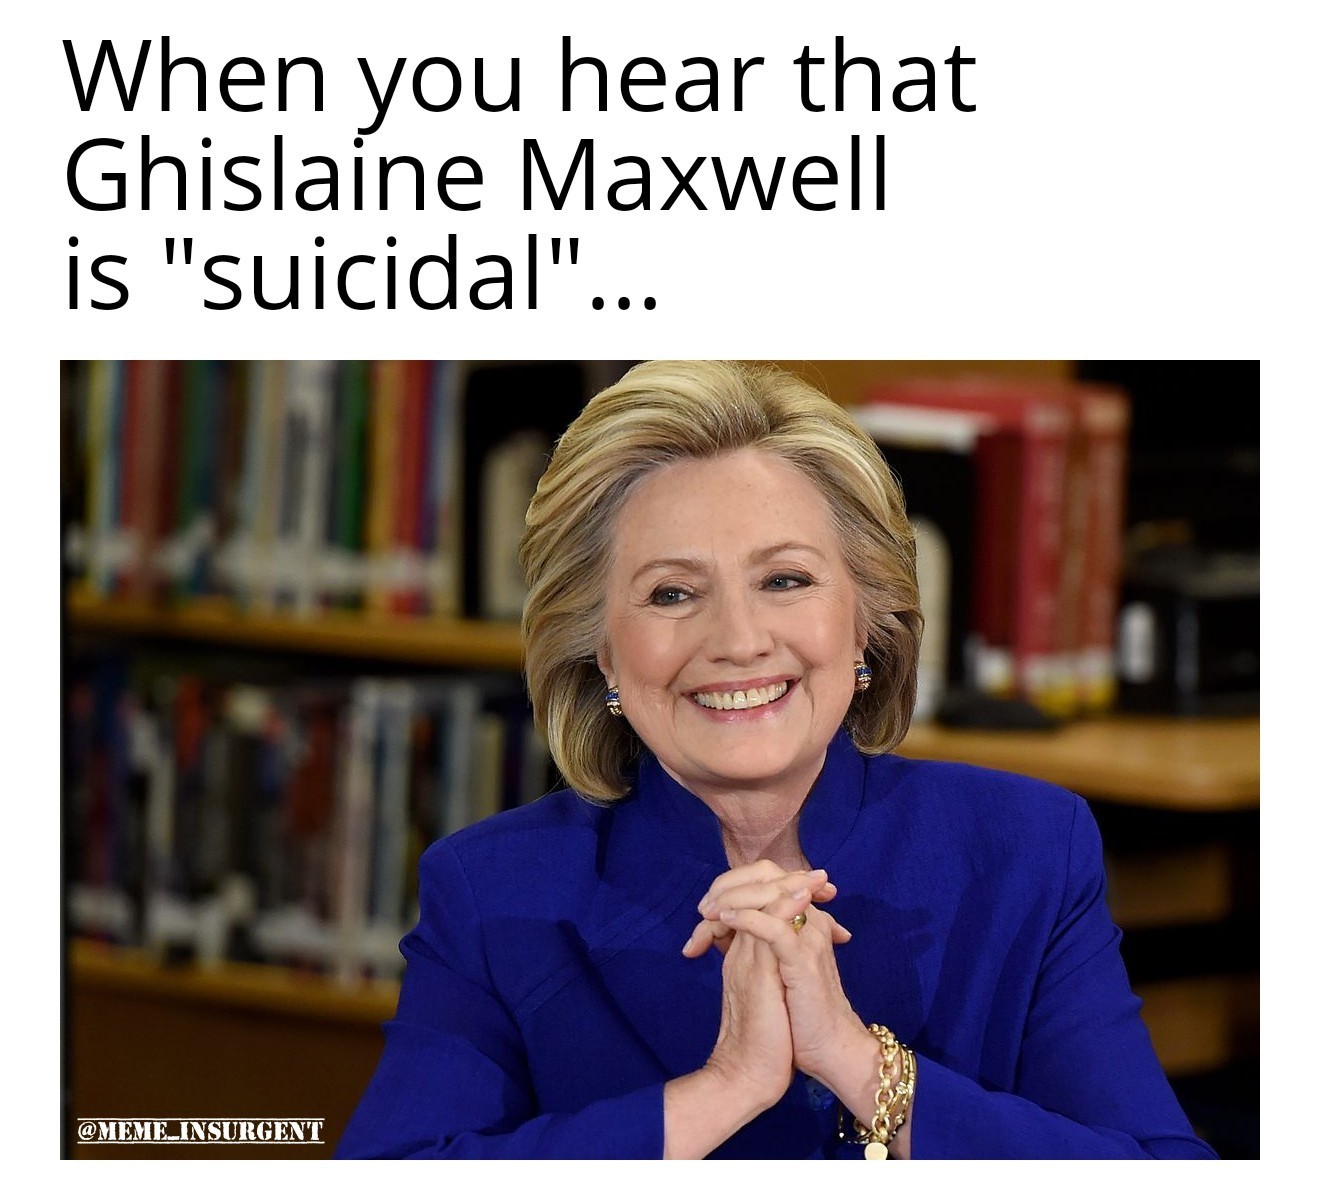 She is "suicidal" of course... - meme